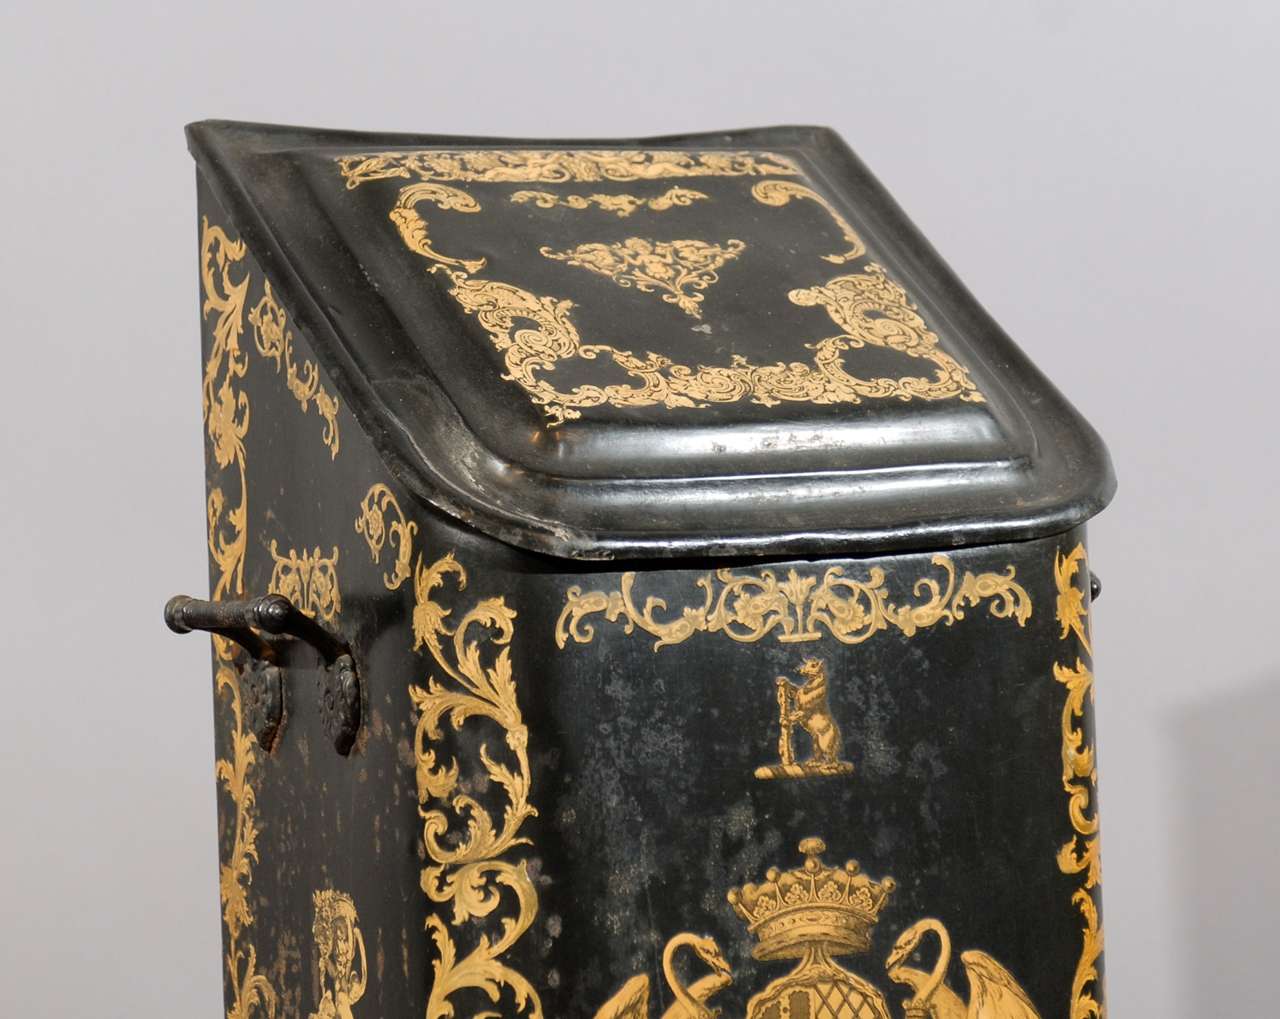 A petite black painted tole coal hod with decopage decoration with lift top, handles on sides and paw feet. 

For many more fine antiques, please visit our online gallery at: www.williamwordantiques.com.

William Word Fine Antiques: Atlanta's